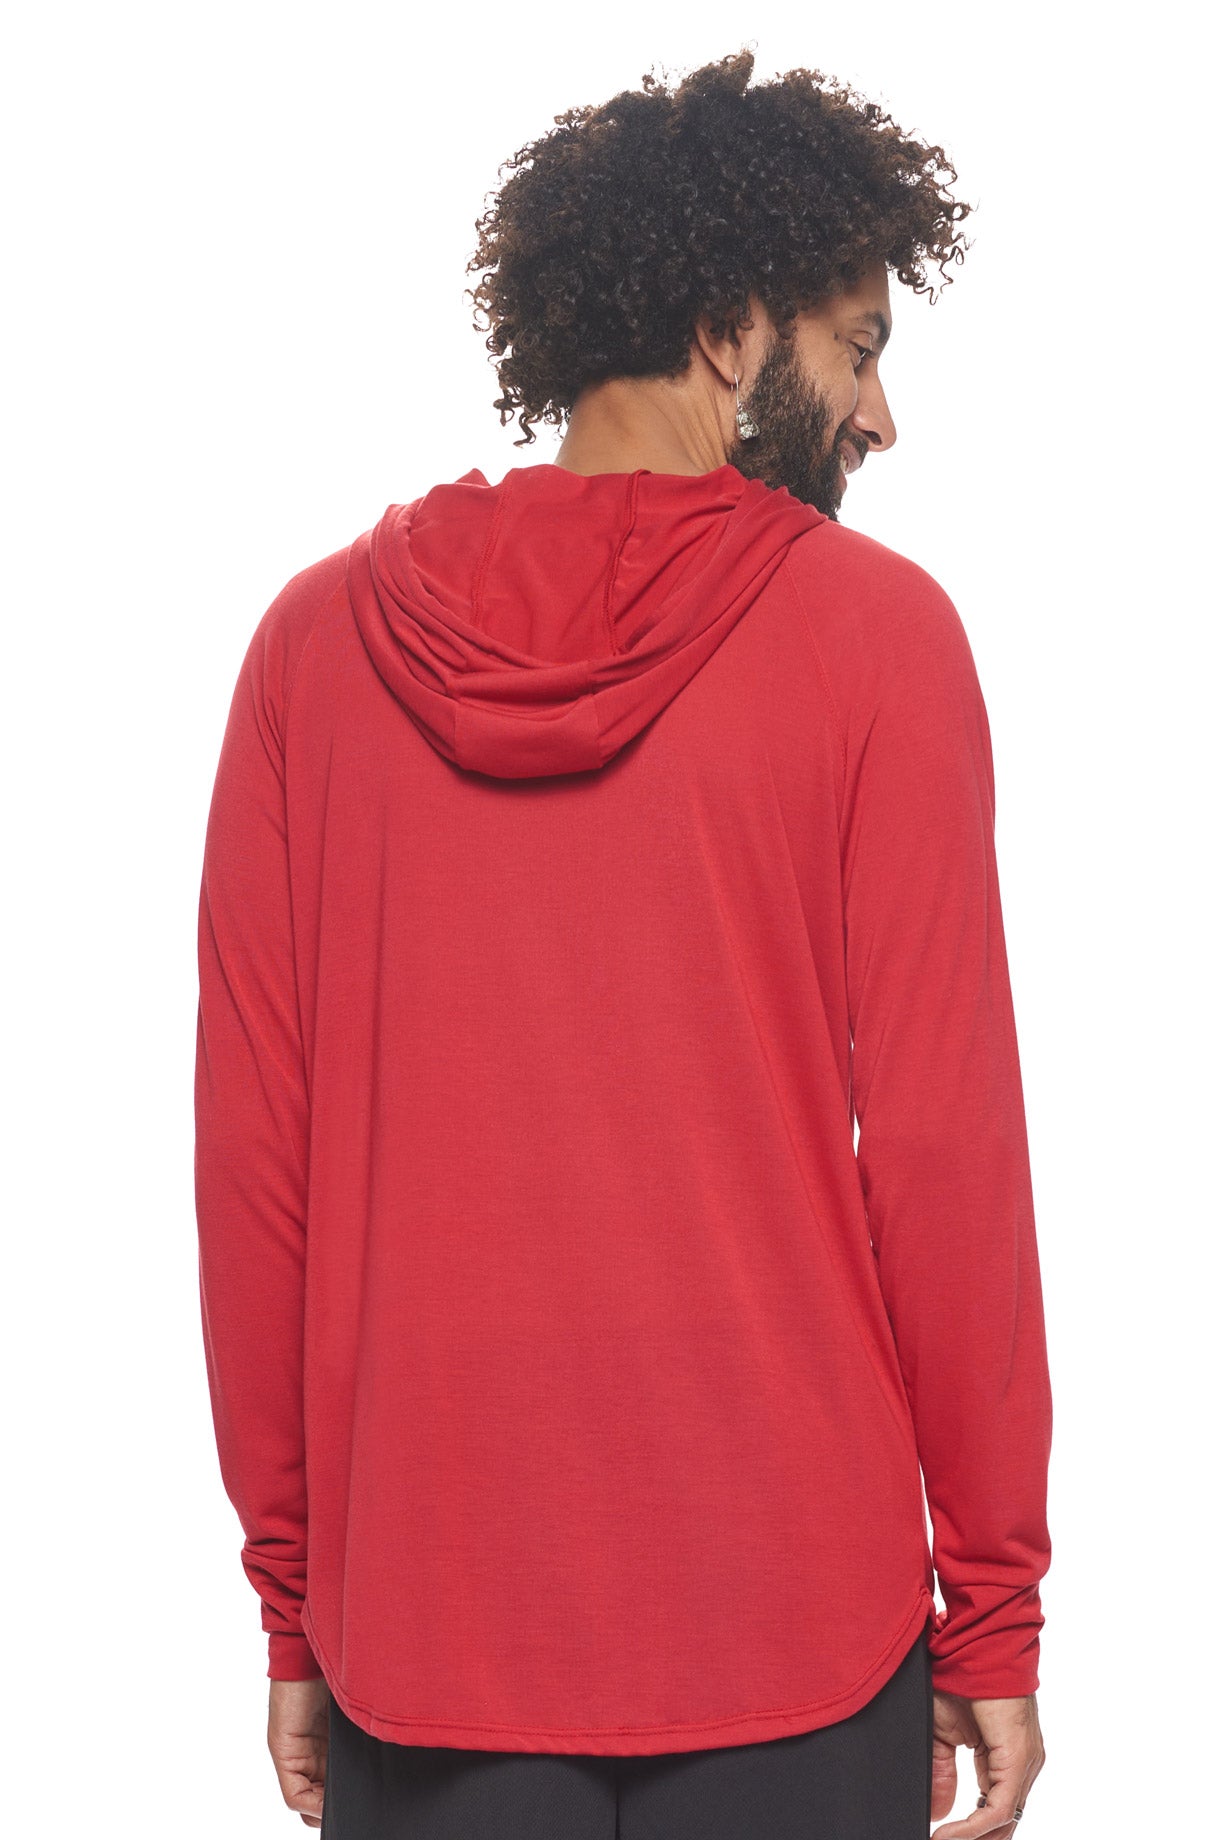 Expert Apparel Men's Hoodie Shirt Siro Soft Performance Active Lifestyle Top Made in USA in Olive Scarlet Red Image 3#color_scarlet